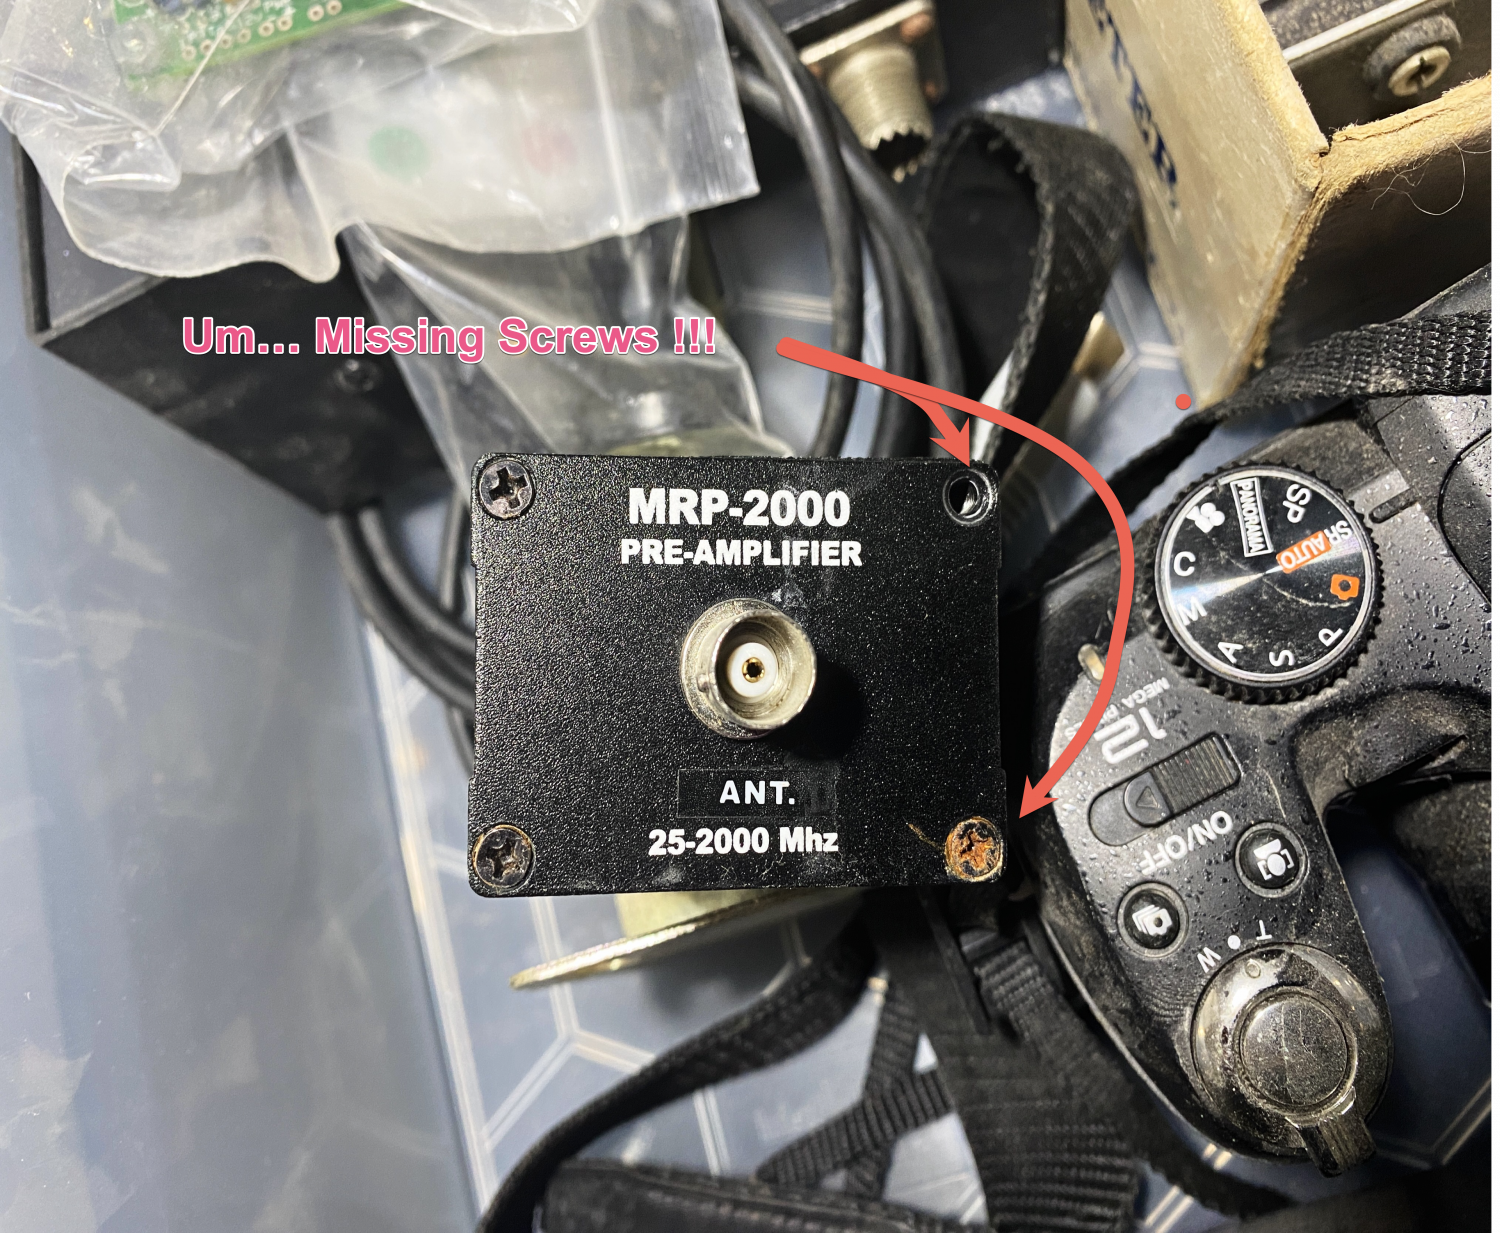 MRP-2000 Pre Amplifier, but with Screws Missing, A Bit Dubious.